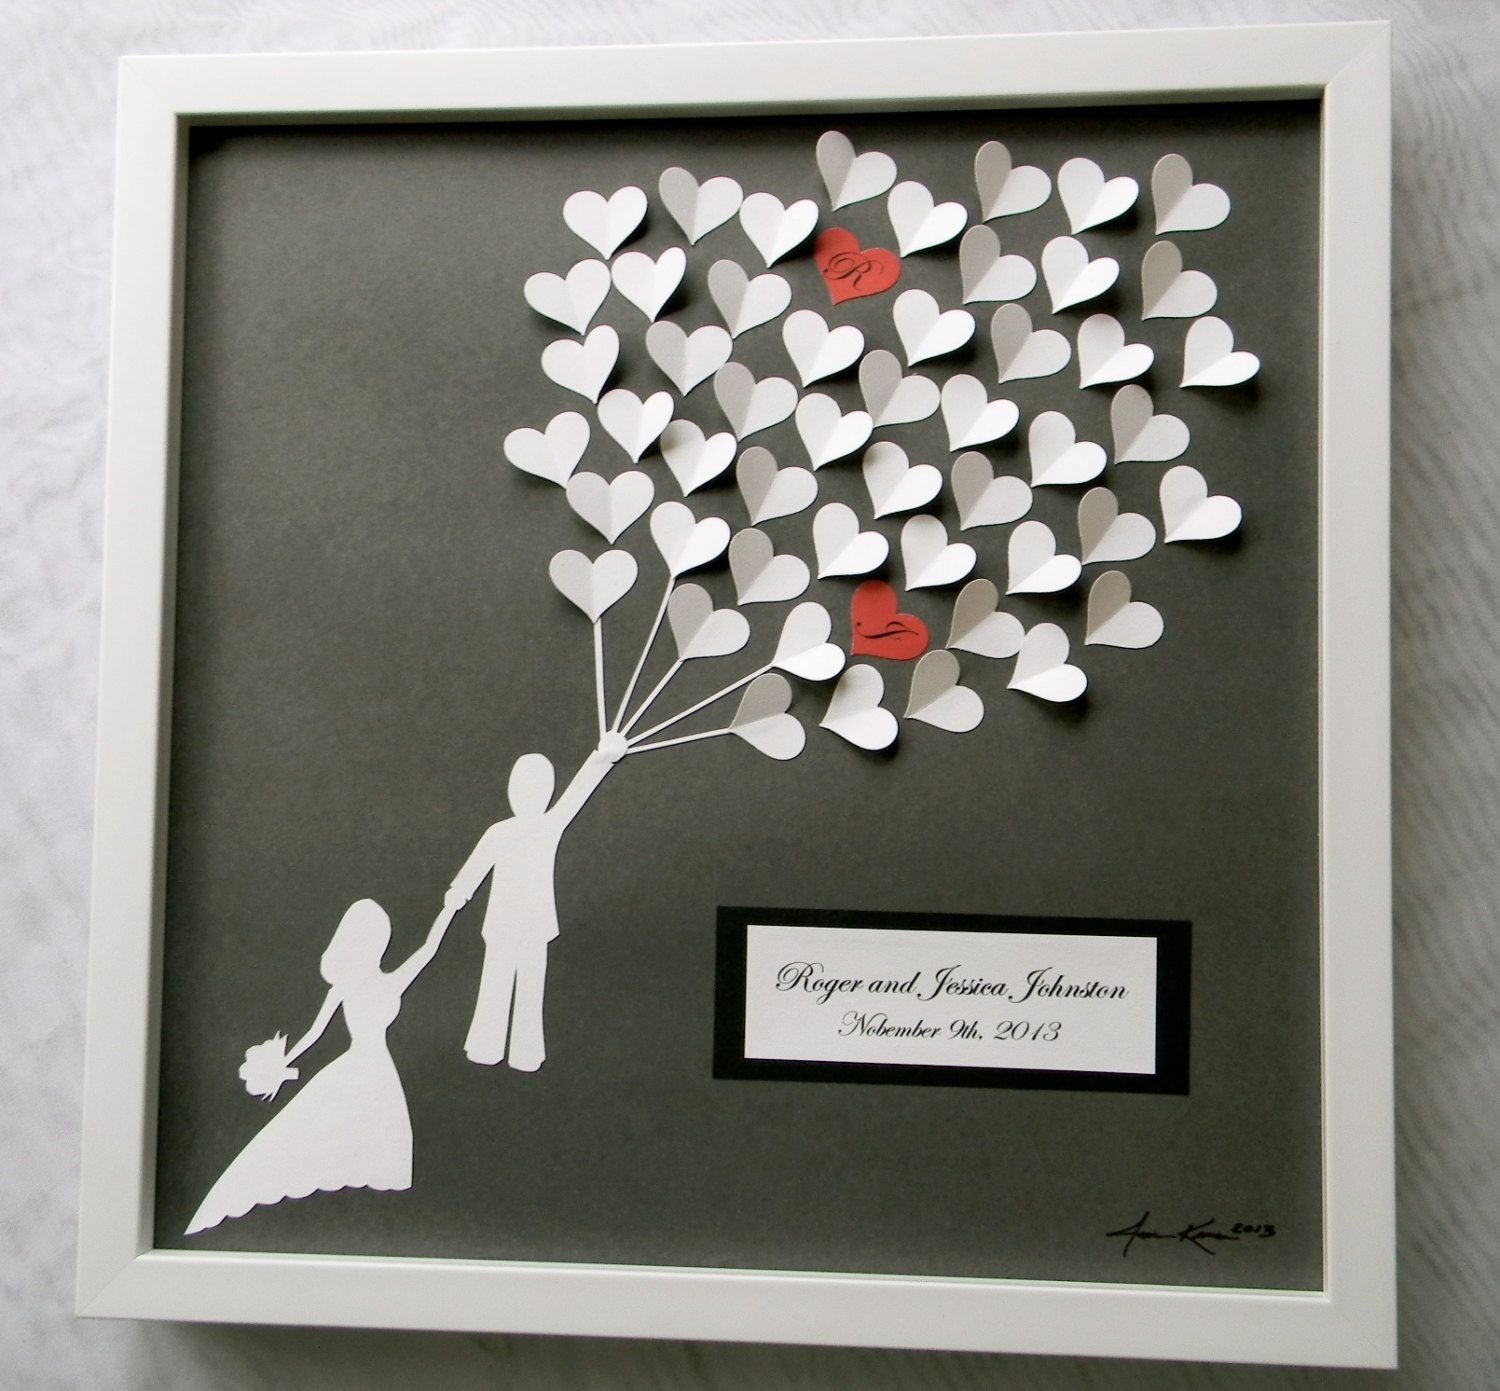 10 Best Wedding Gift Ideas For Bride And Groom wedding guest book alternative 3d paper hearts lovely bridal shower 2022